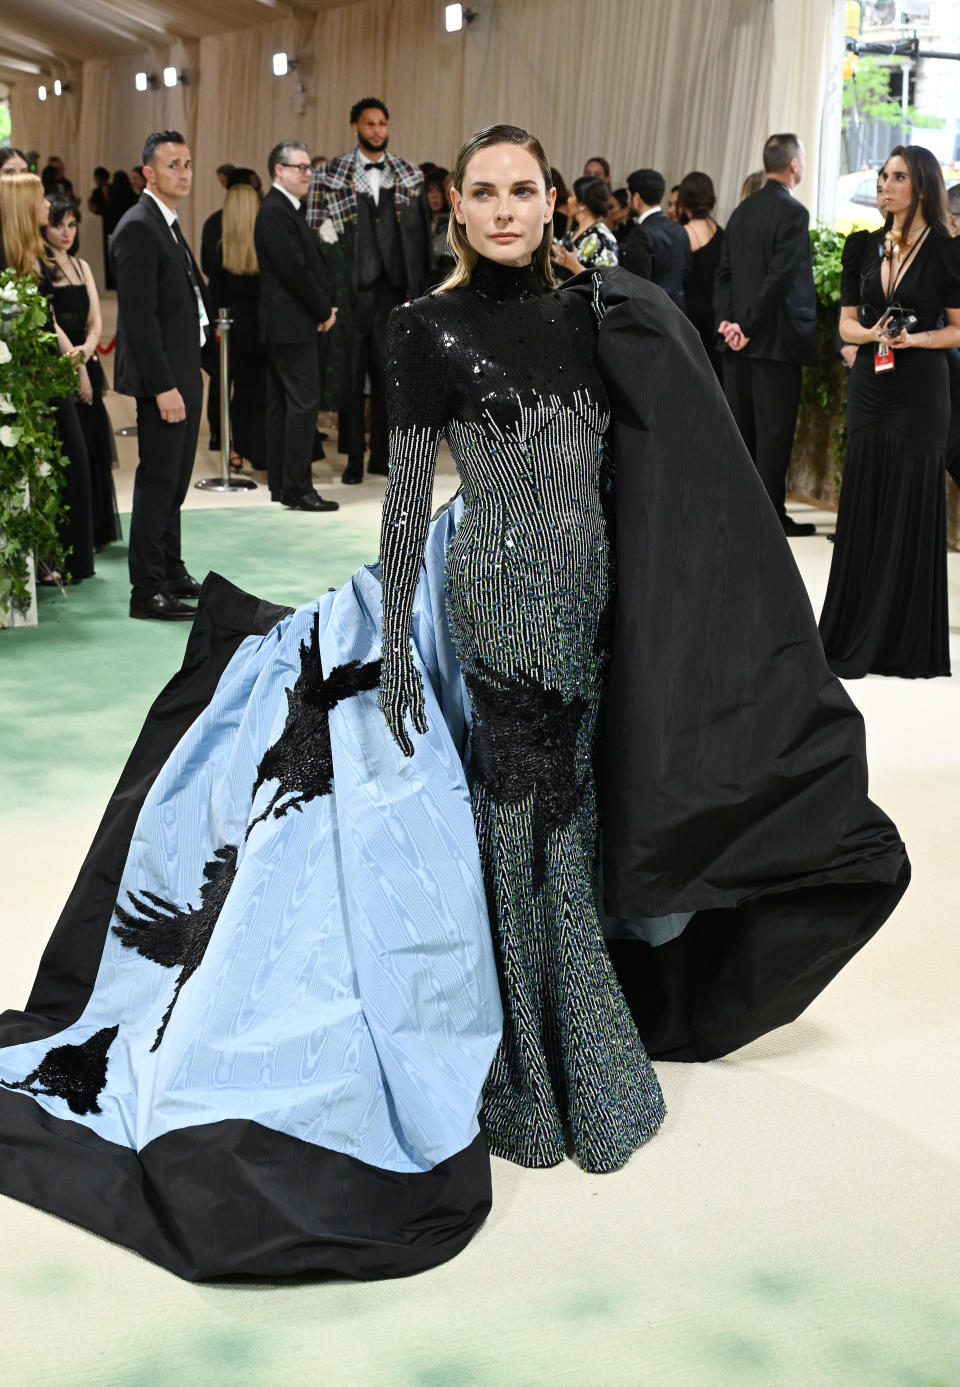 Rebecca Ferguson at the Met Gala in a dramatic gown featuring a bird motif that was revealed after removing her coat